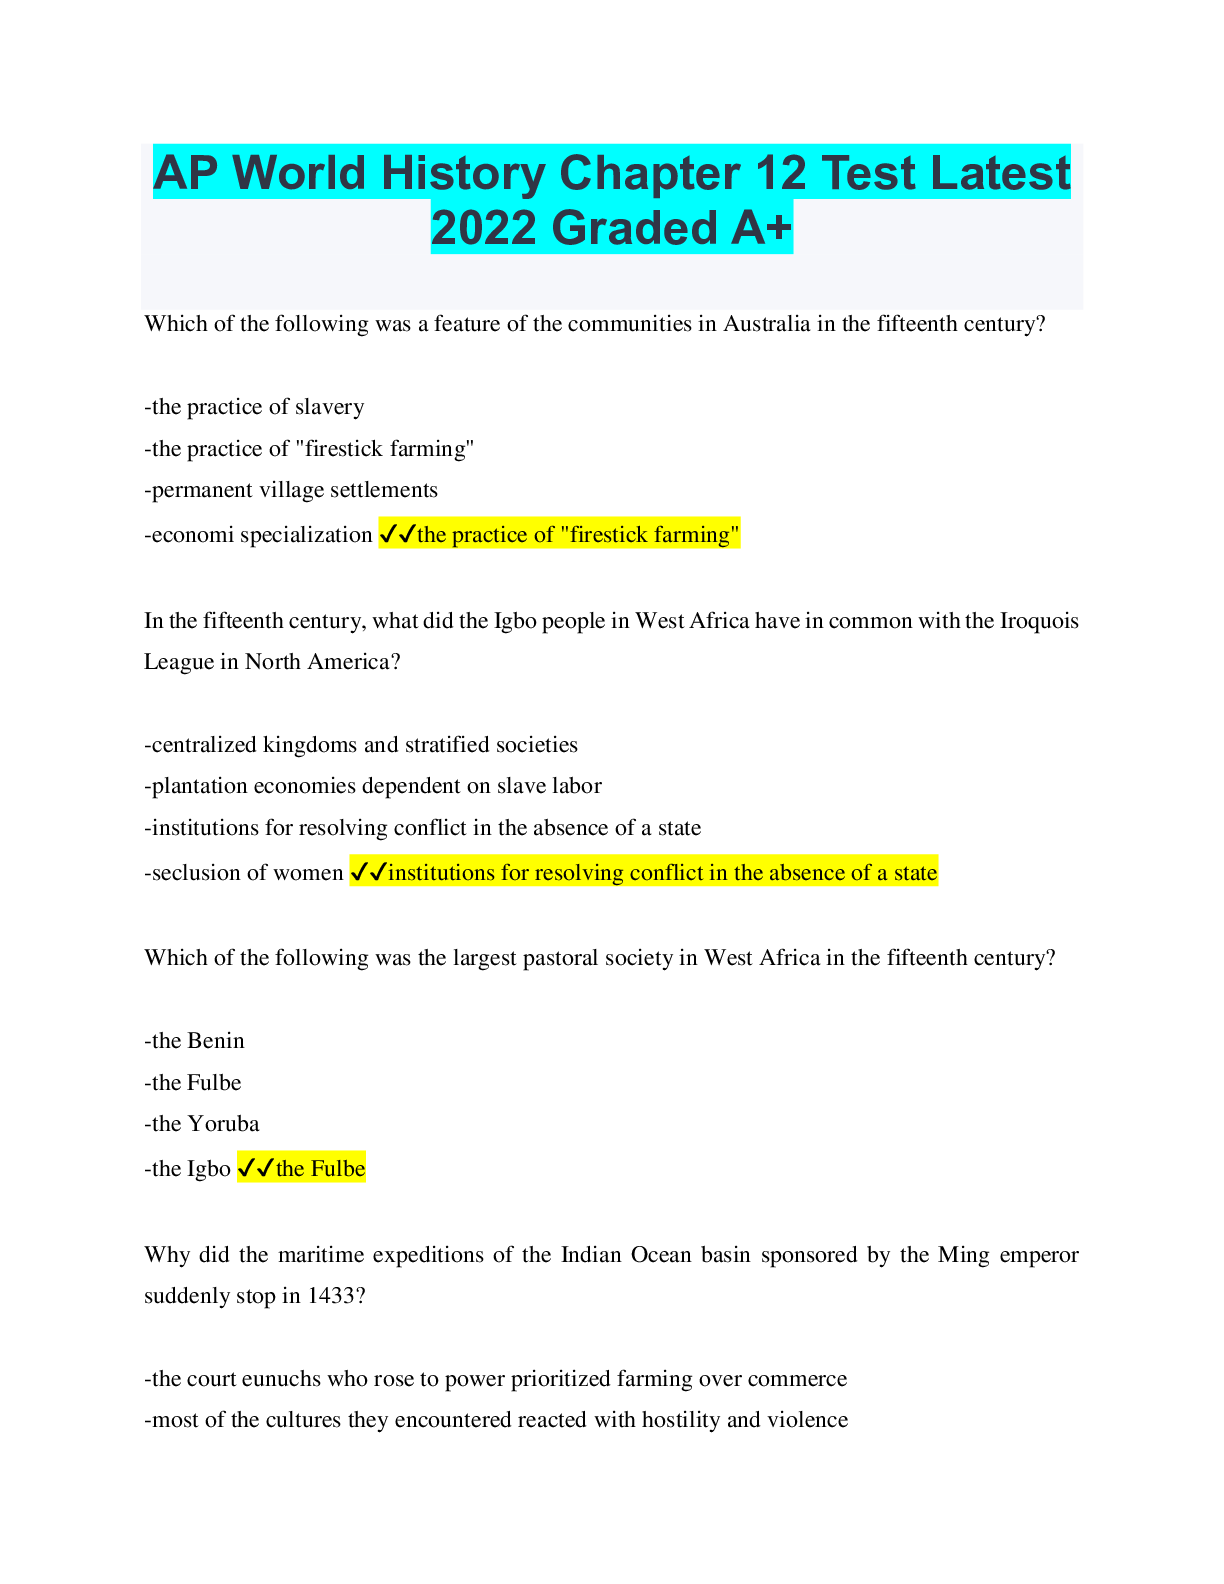 AP World History Chapter 12 Test Latest 2022 Graded A+ Browsegrades